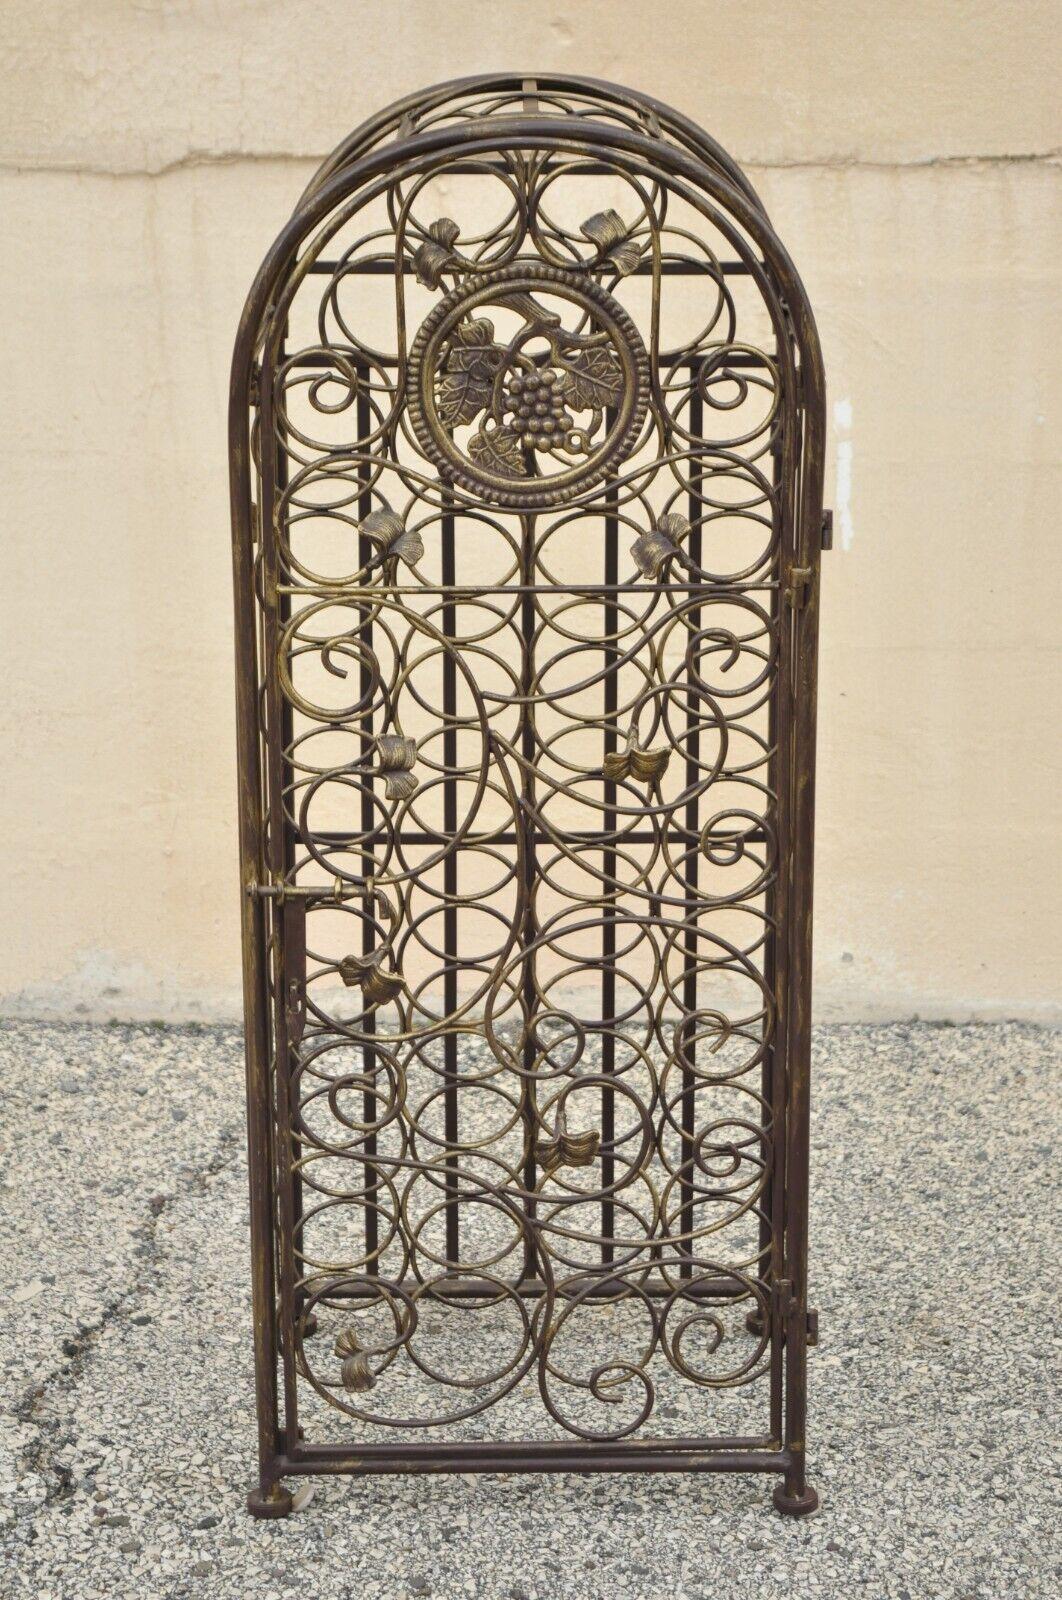 Wrought iron 37 wine bottle slot holder stand with door Victorian style. Item features 37 bottle slots, grapevine and leaf design to front door, wrought iron construction, distressed finish, great style and form. Circa late 20th century.